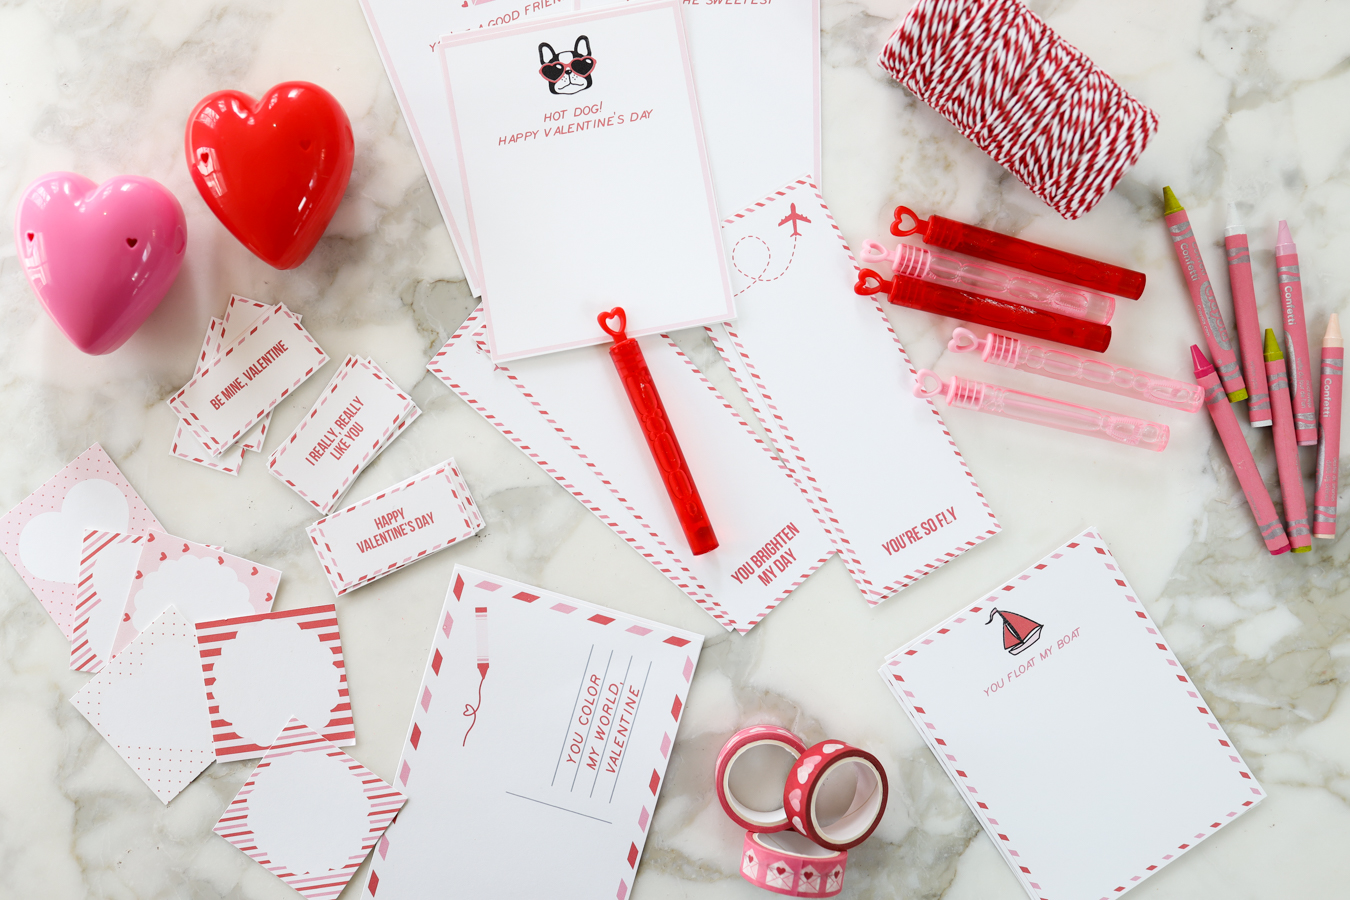 15 Cool DIY Valentine's Day Gifts for Him